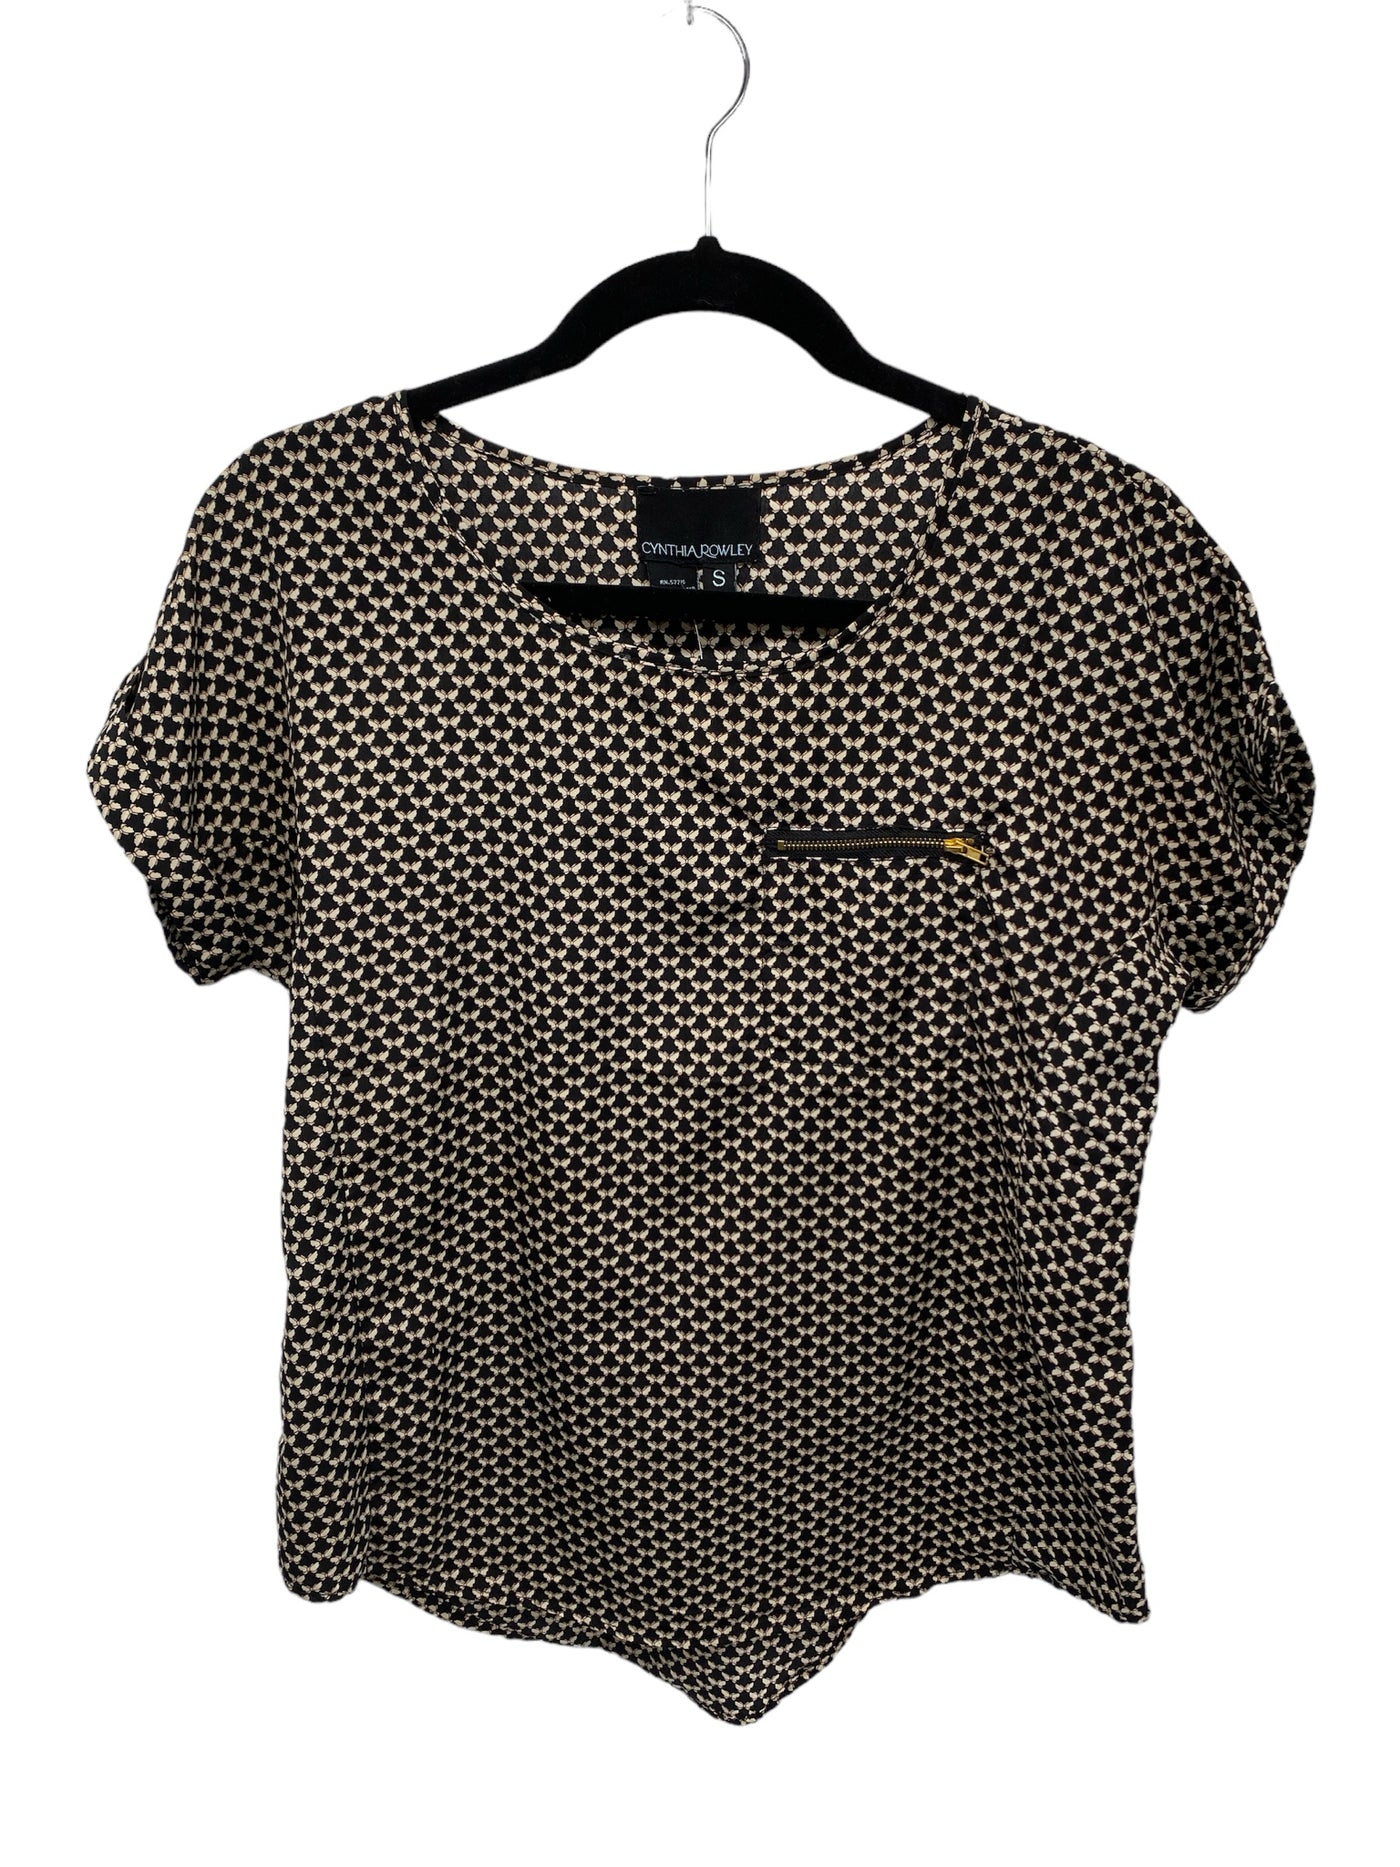 Cynthia Rowley Misses Size Small Black Print SS Blouse